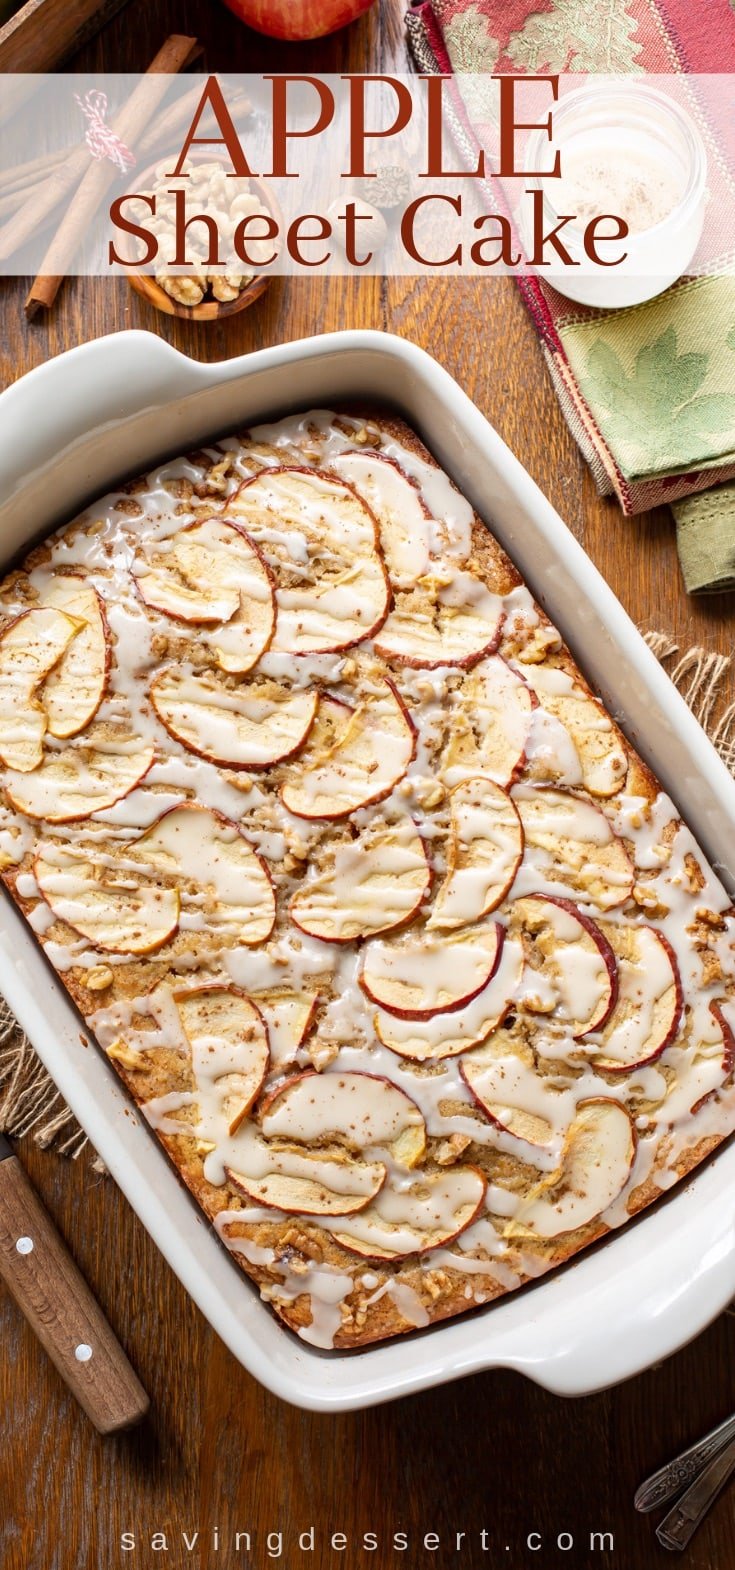 An overhead view of an apple sheet cake topped with sliced apples and walnuts, drizzled with a simple icing and a sprinkle of cinnamon